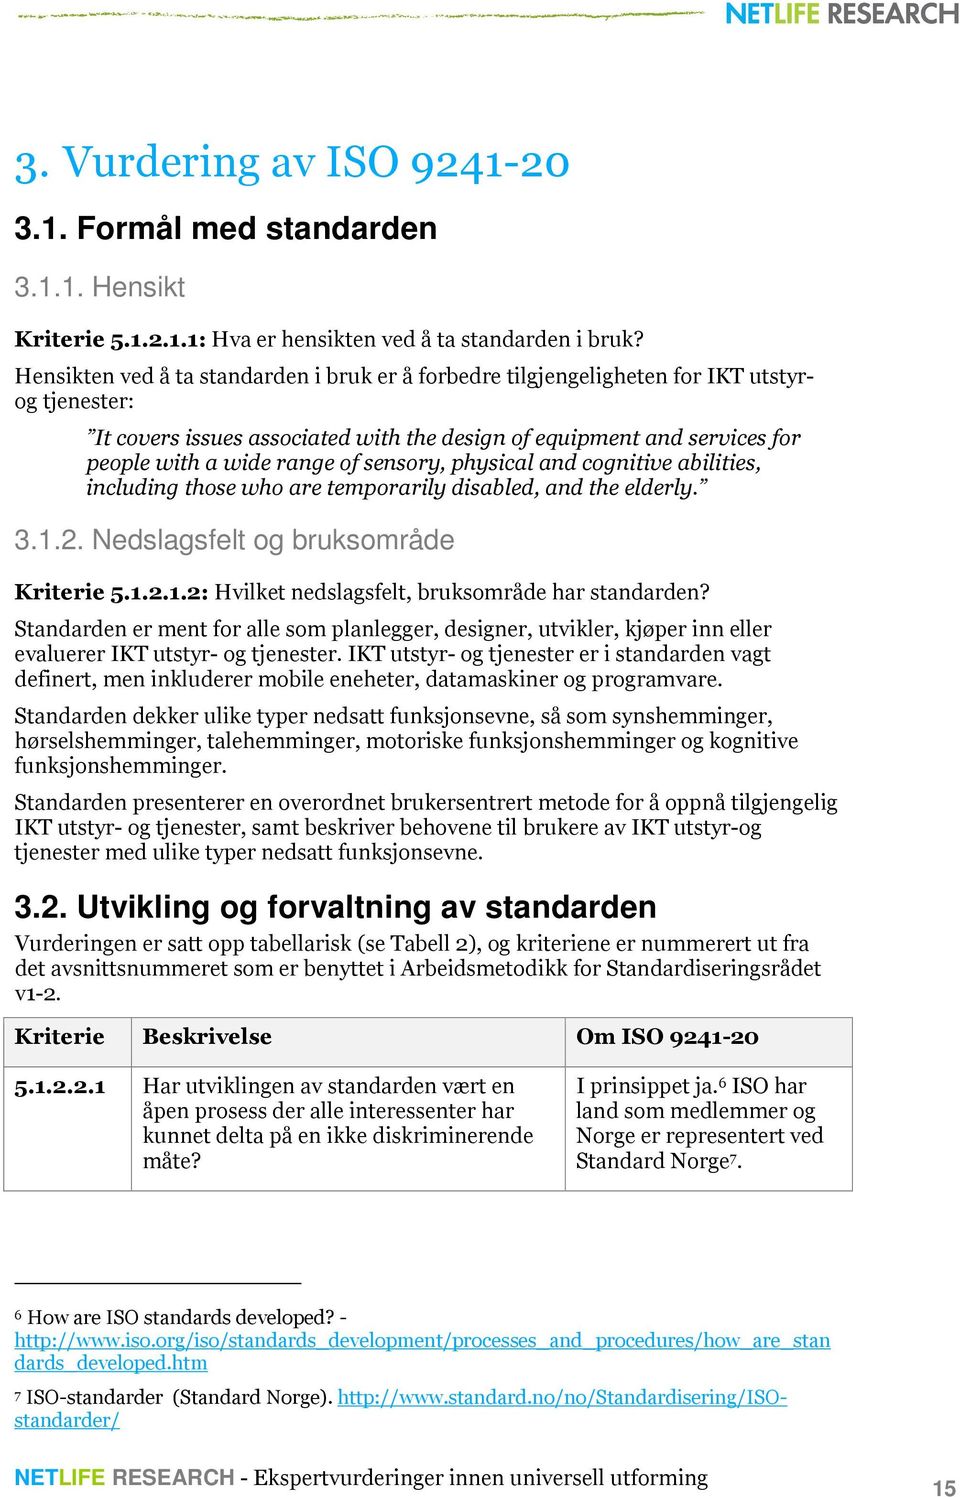 sensory, physical and cognitive abilities, including those who are temporarily disabled, and the elderly. 3.1.2. Nedslagsfelt og bruksområde Kriterie 5.1.2.1.2: Hvilket nedslagsfelt, bruksområde har standarden?